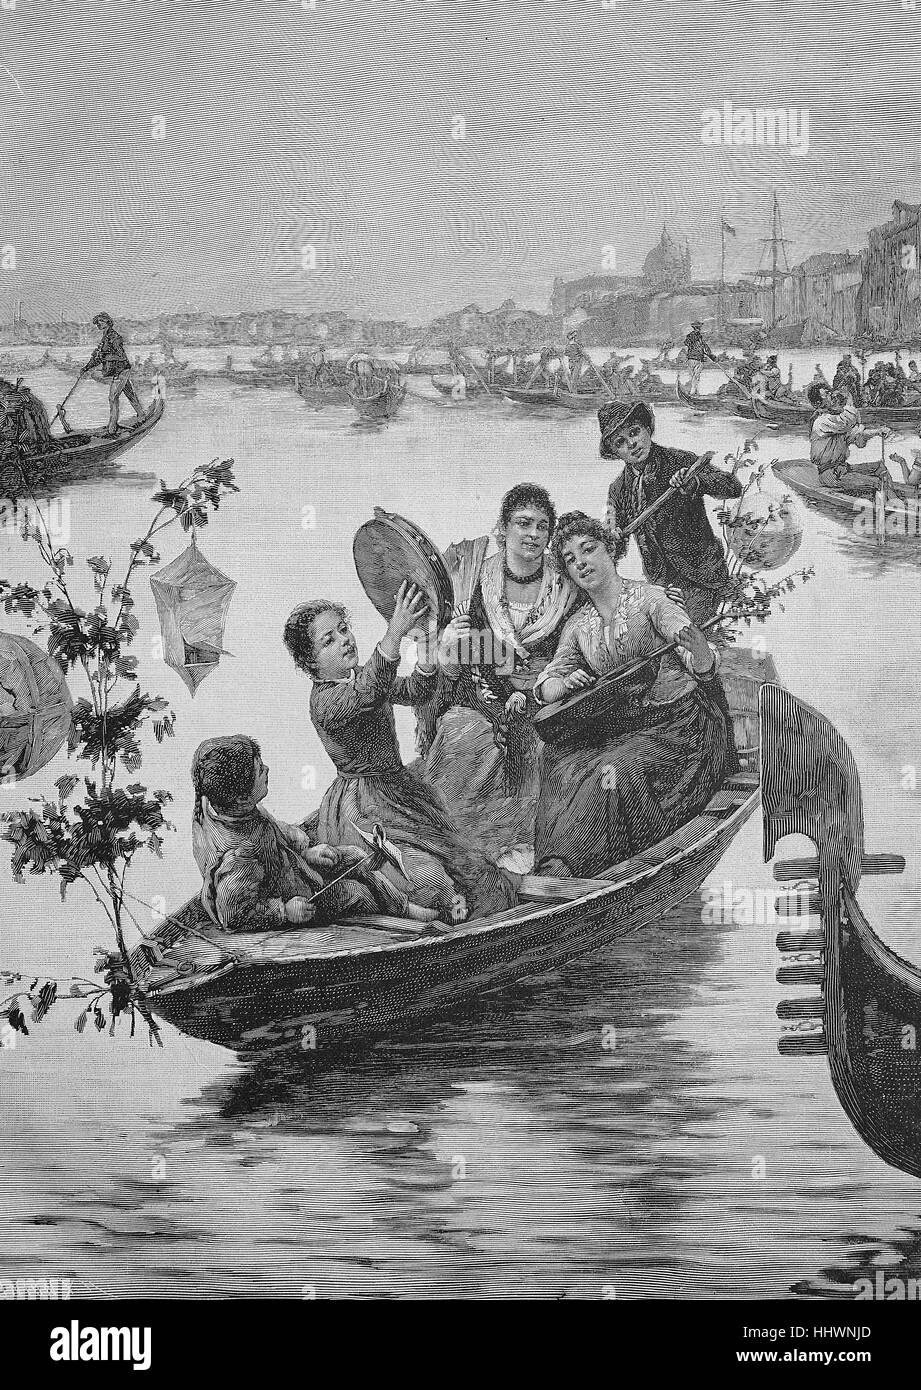 Lustige Fahrt, Funny ride, boat trip with music, after a painting by A. Paoletti, Italy, historical image or illustration, published 1890, digital improved Stock Photo